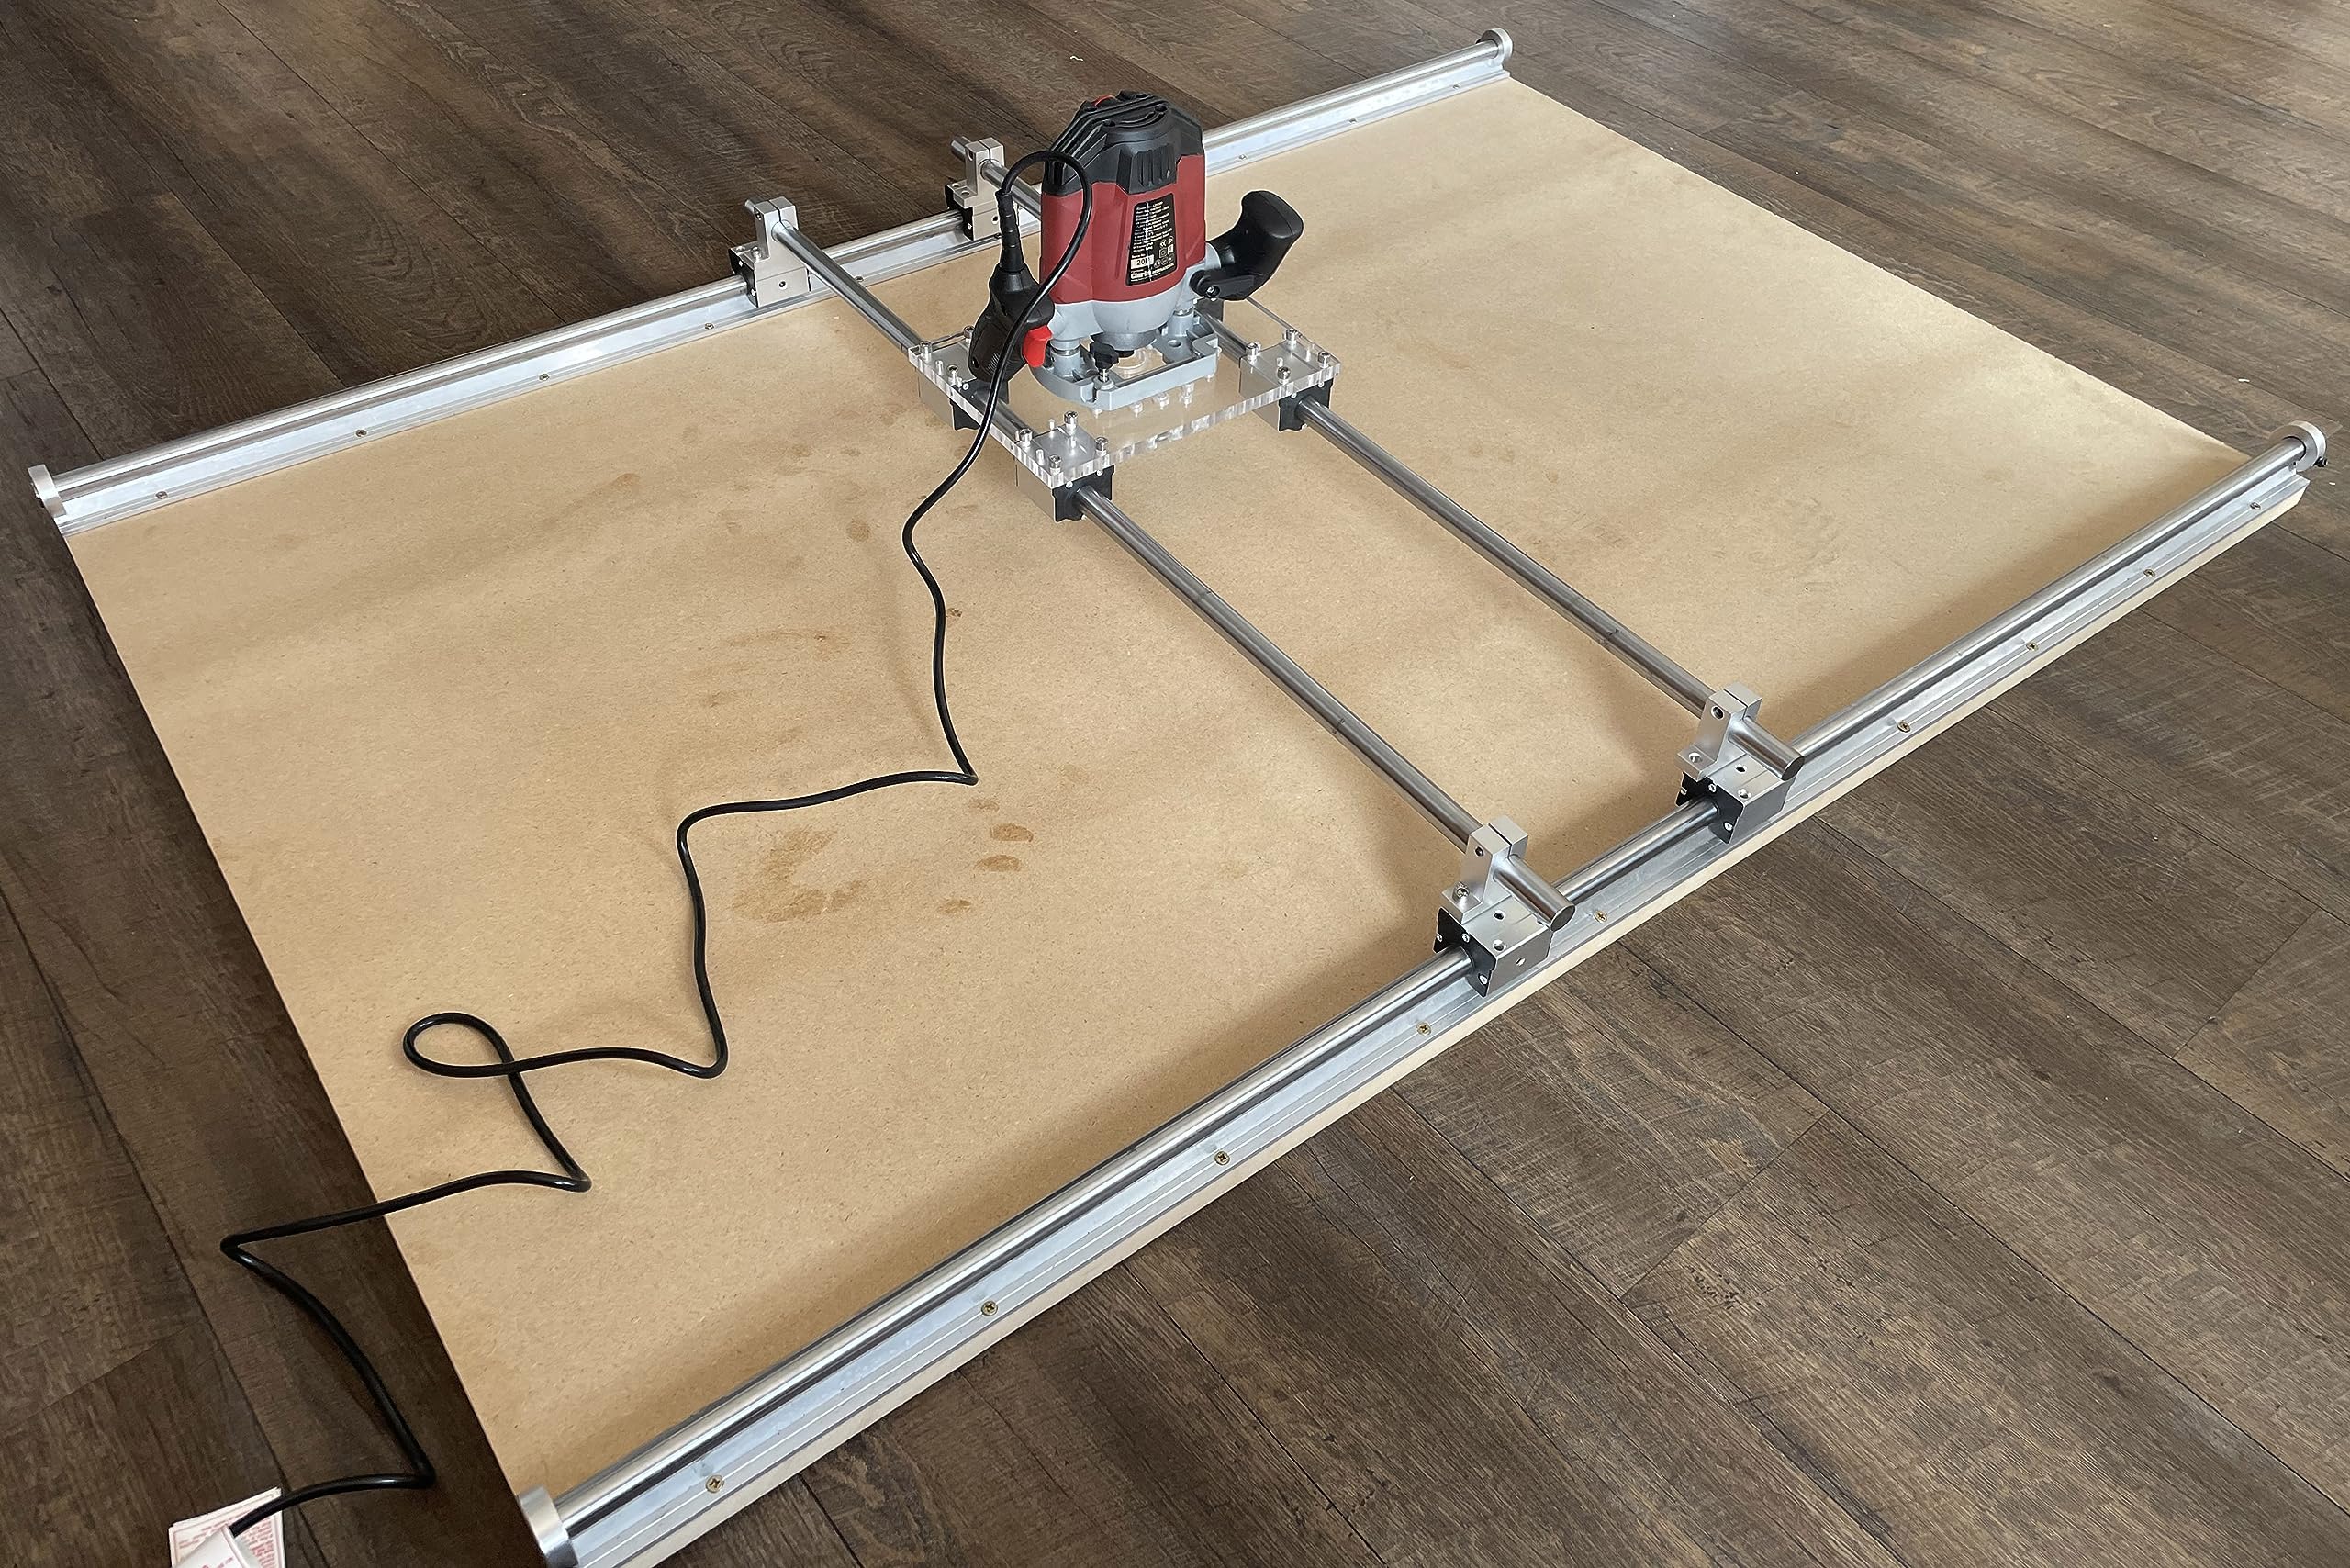 Router Sled - Wood Slab Flattening Mill Router Jig - Up to 1500x1500mm (1500x1500mm)